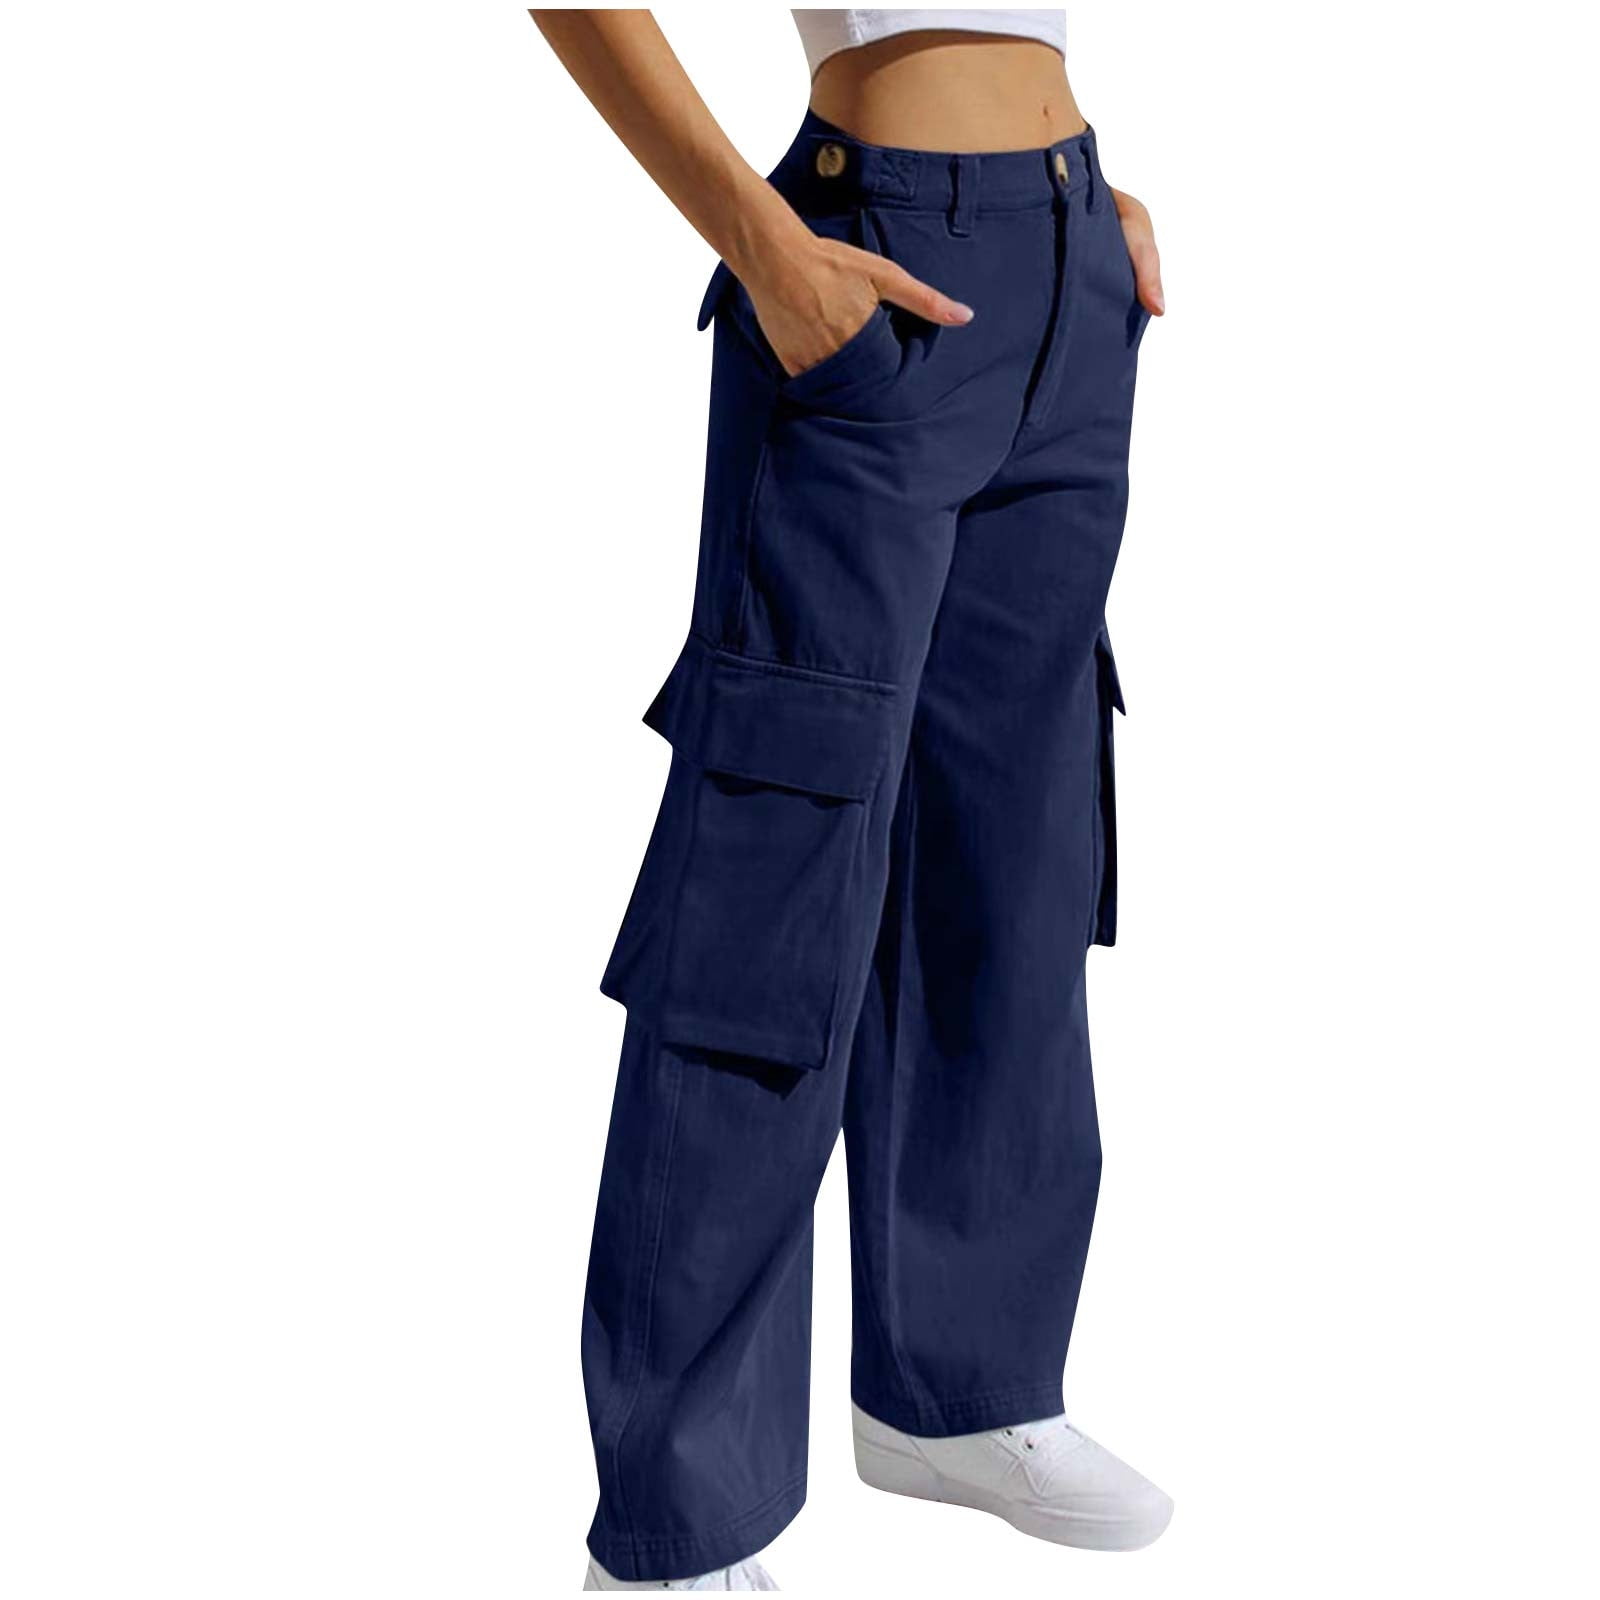 Women's Mid-rise Casual Fit Cargo Pants - Knox Rose™ Navy Blue 1x